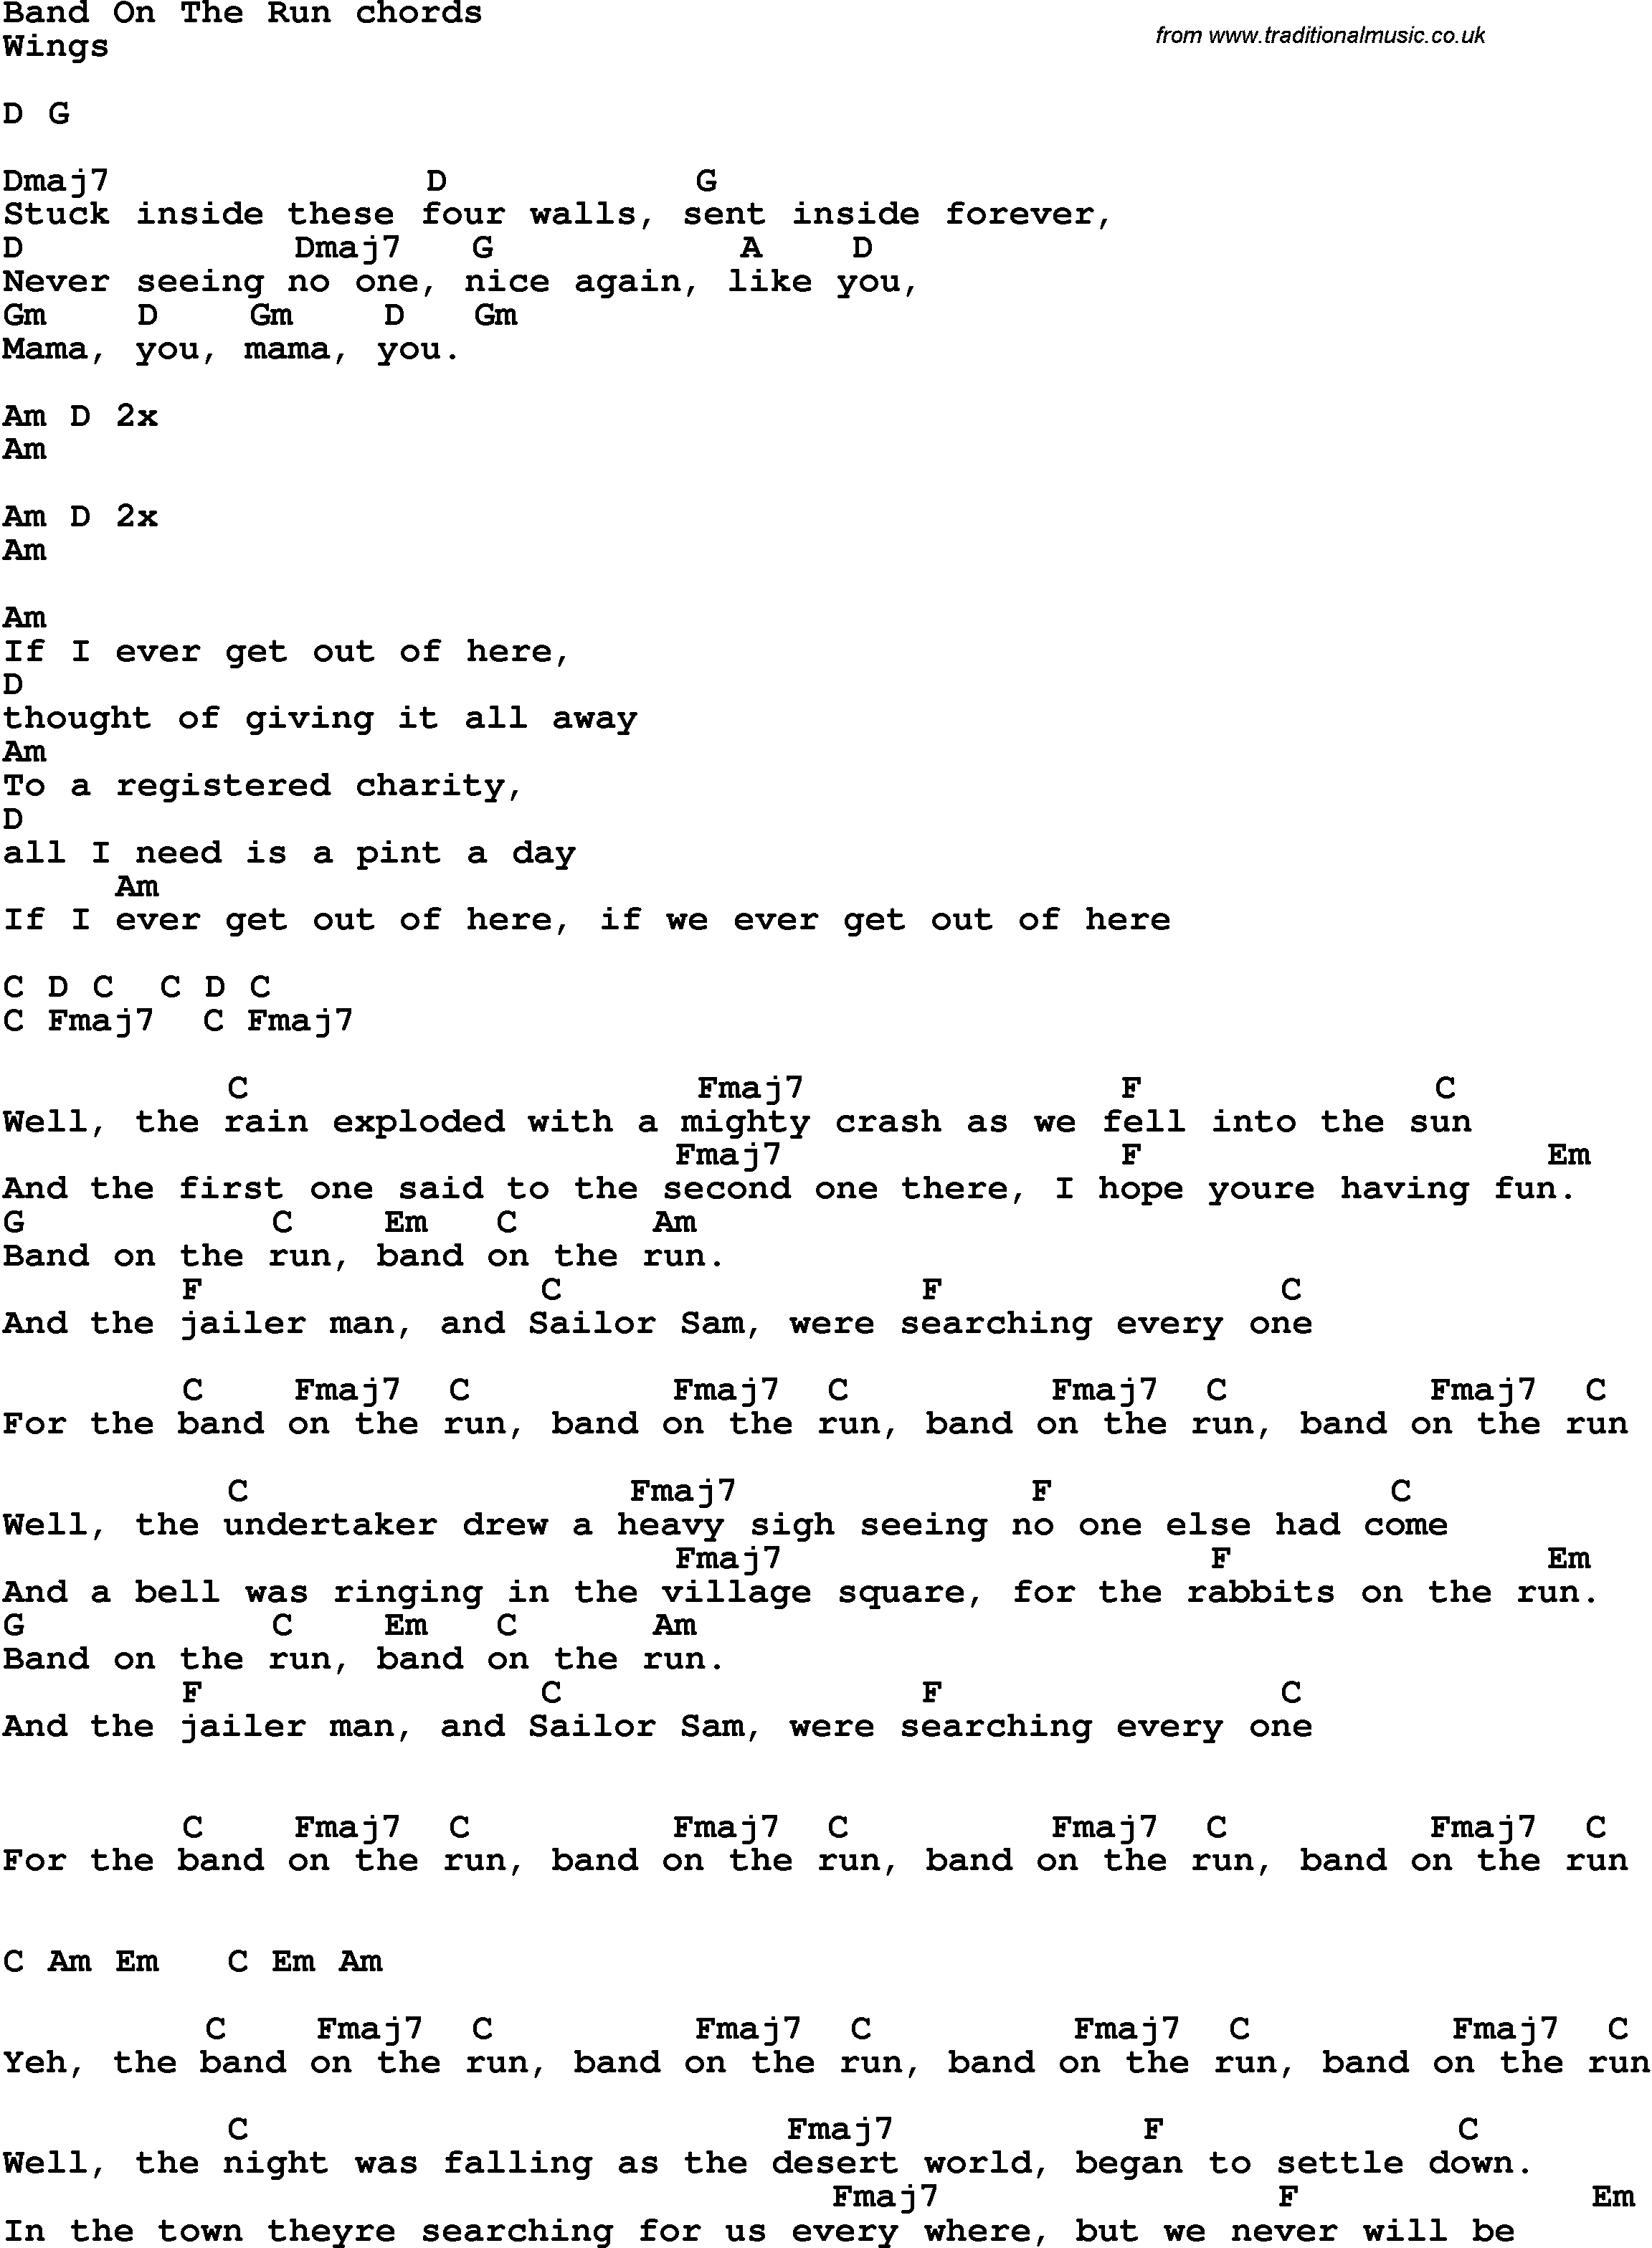 Song Lyrics with guitar chords for Band On The Run